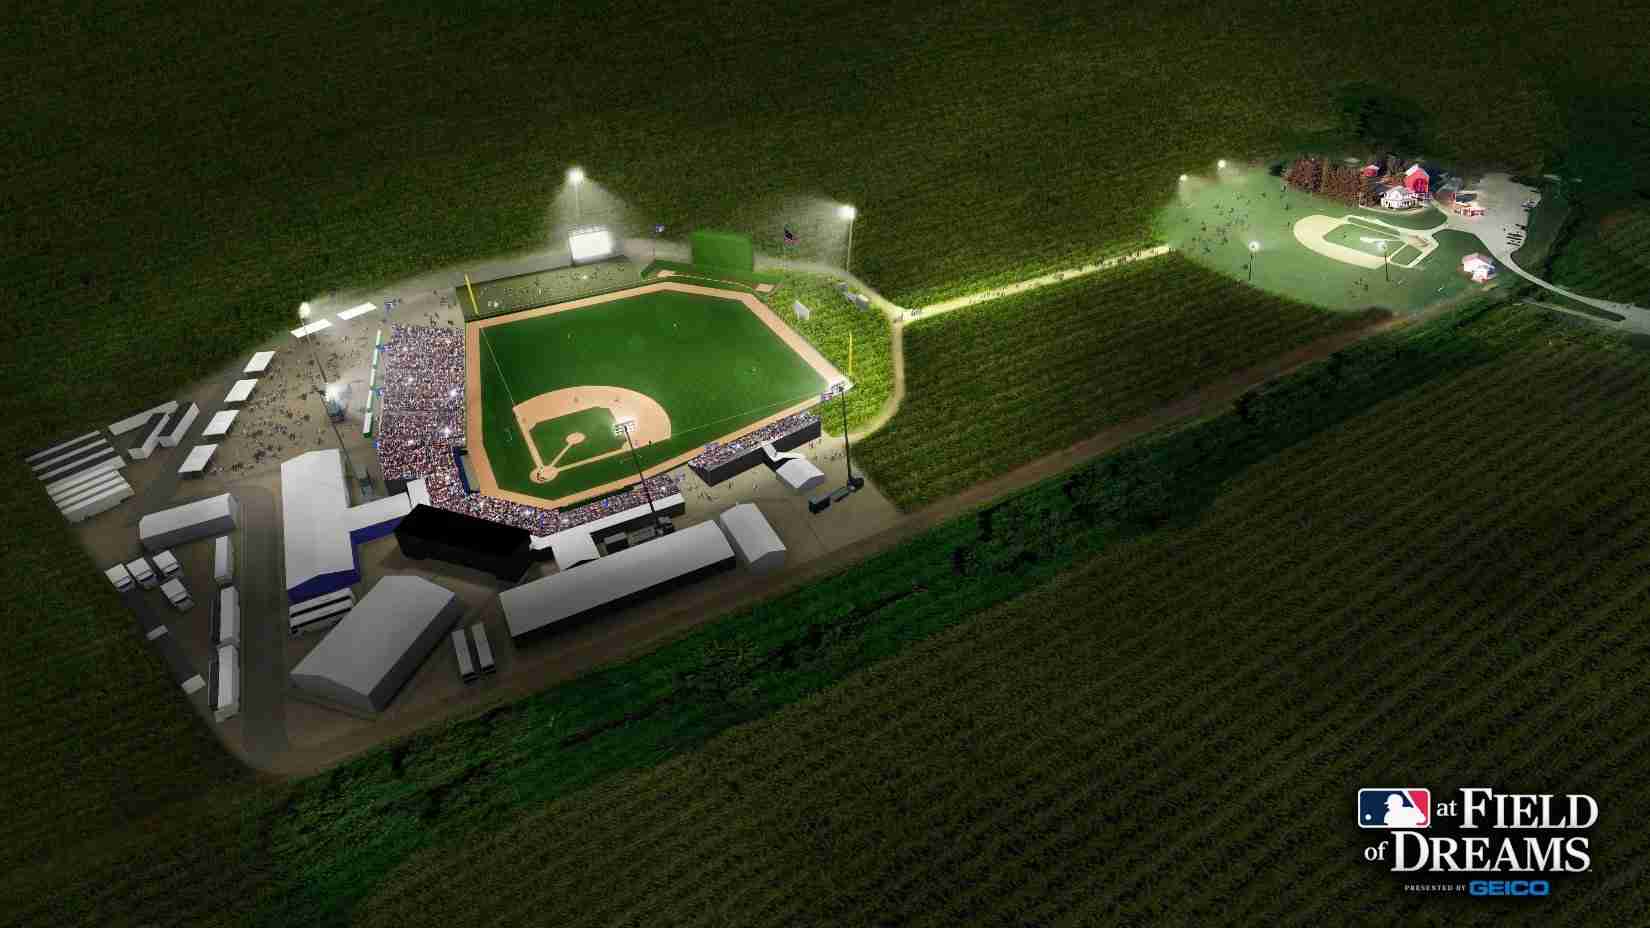 Field of Dreams game: How to watch and stream Cubs vs. Reds in Iowa